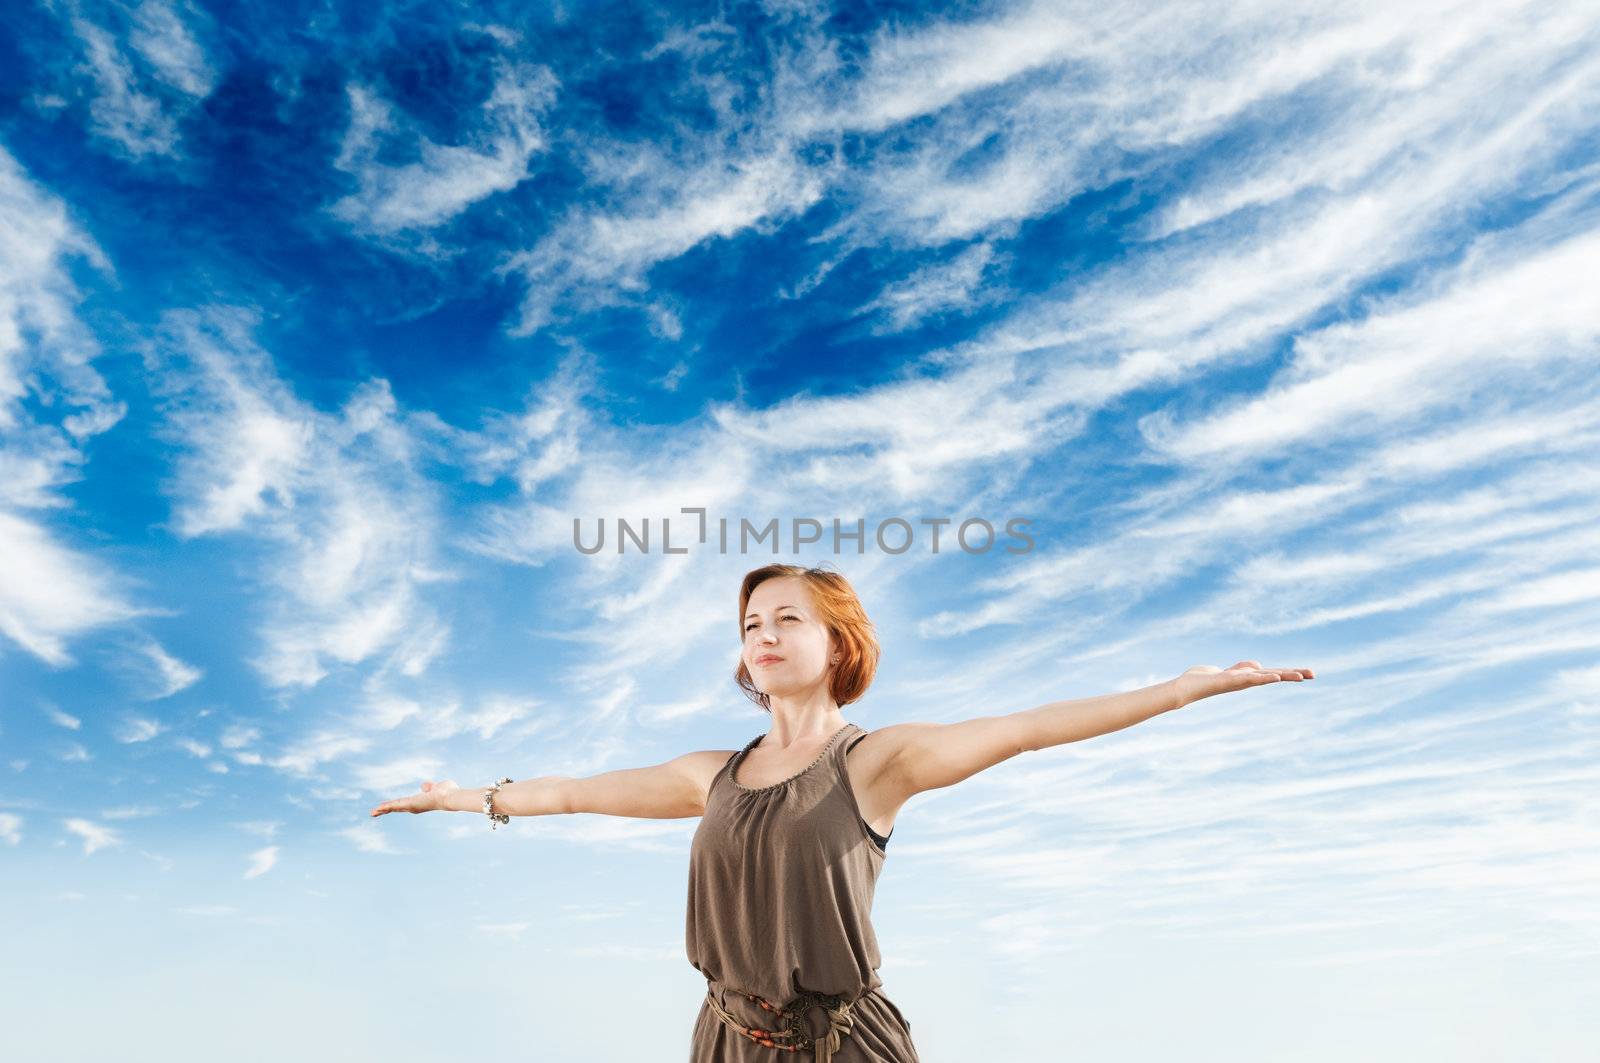 Beautiful young dancer performing yoga-dance outdoors with blue sky and clouds in the background